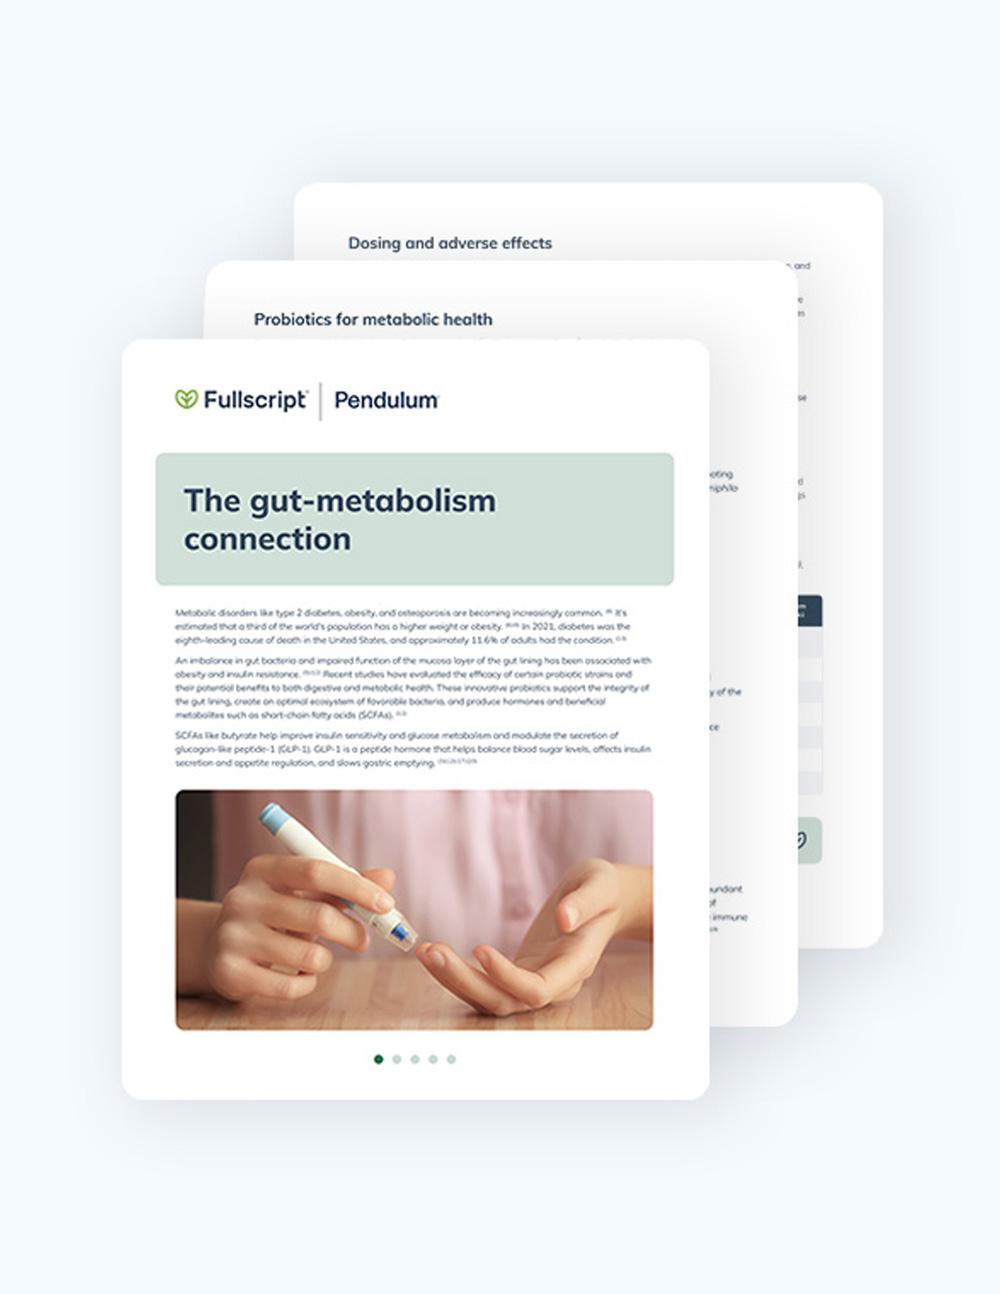 The gut-metabolism connection handout